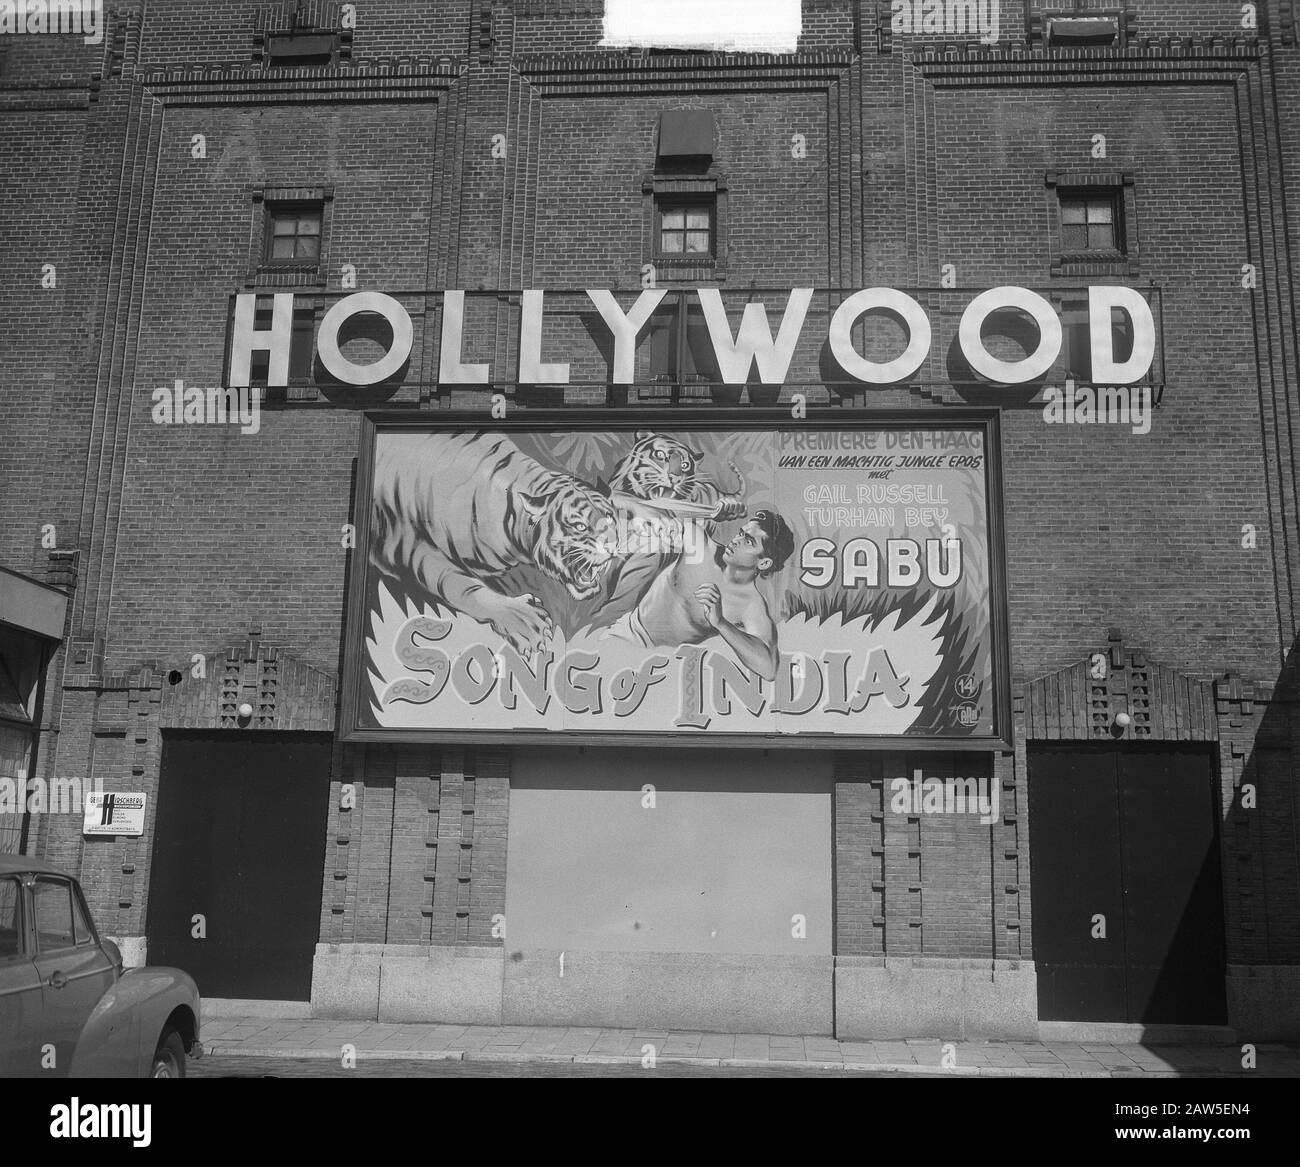 Advertising for the film Song of India on facade cinema Hollywood Annotation: Mission Europa Film Hague Date: April 12, 1950 Location: The Hague, South Holland Keywords: cinemas advertising Institution Name: Roxy Theater Stock Photo